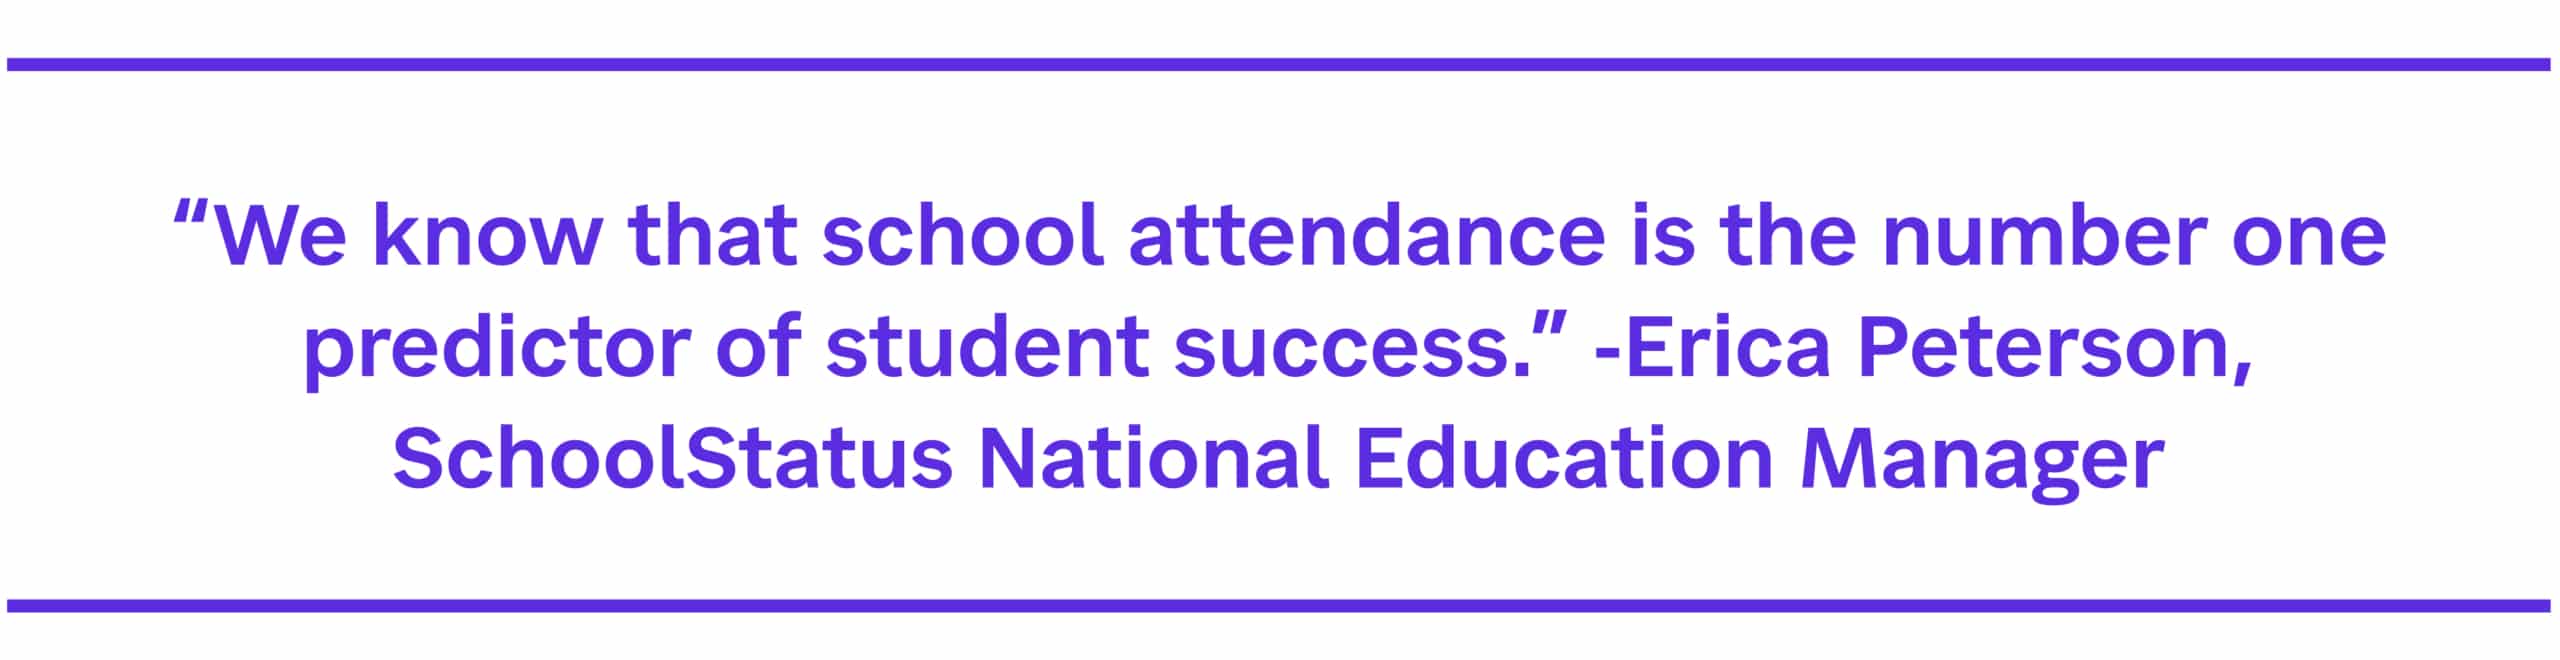 Quote. We know that school attendance is the number one predictor of student success.